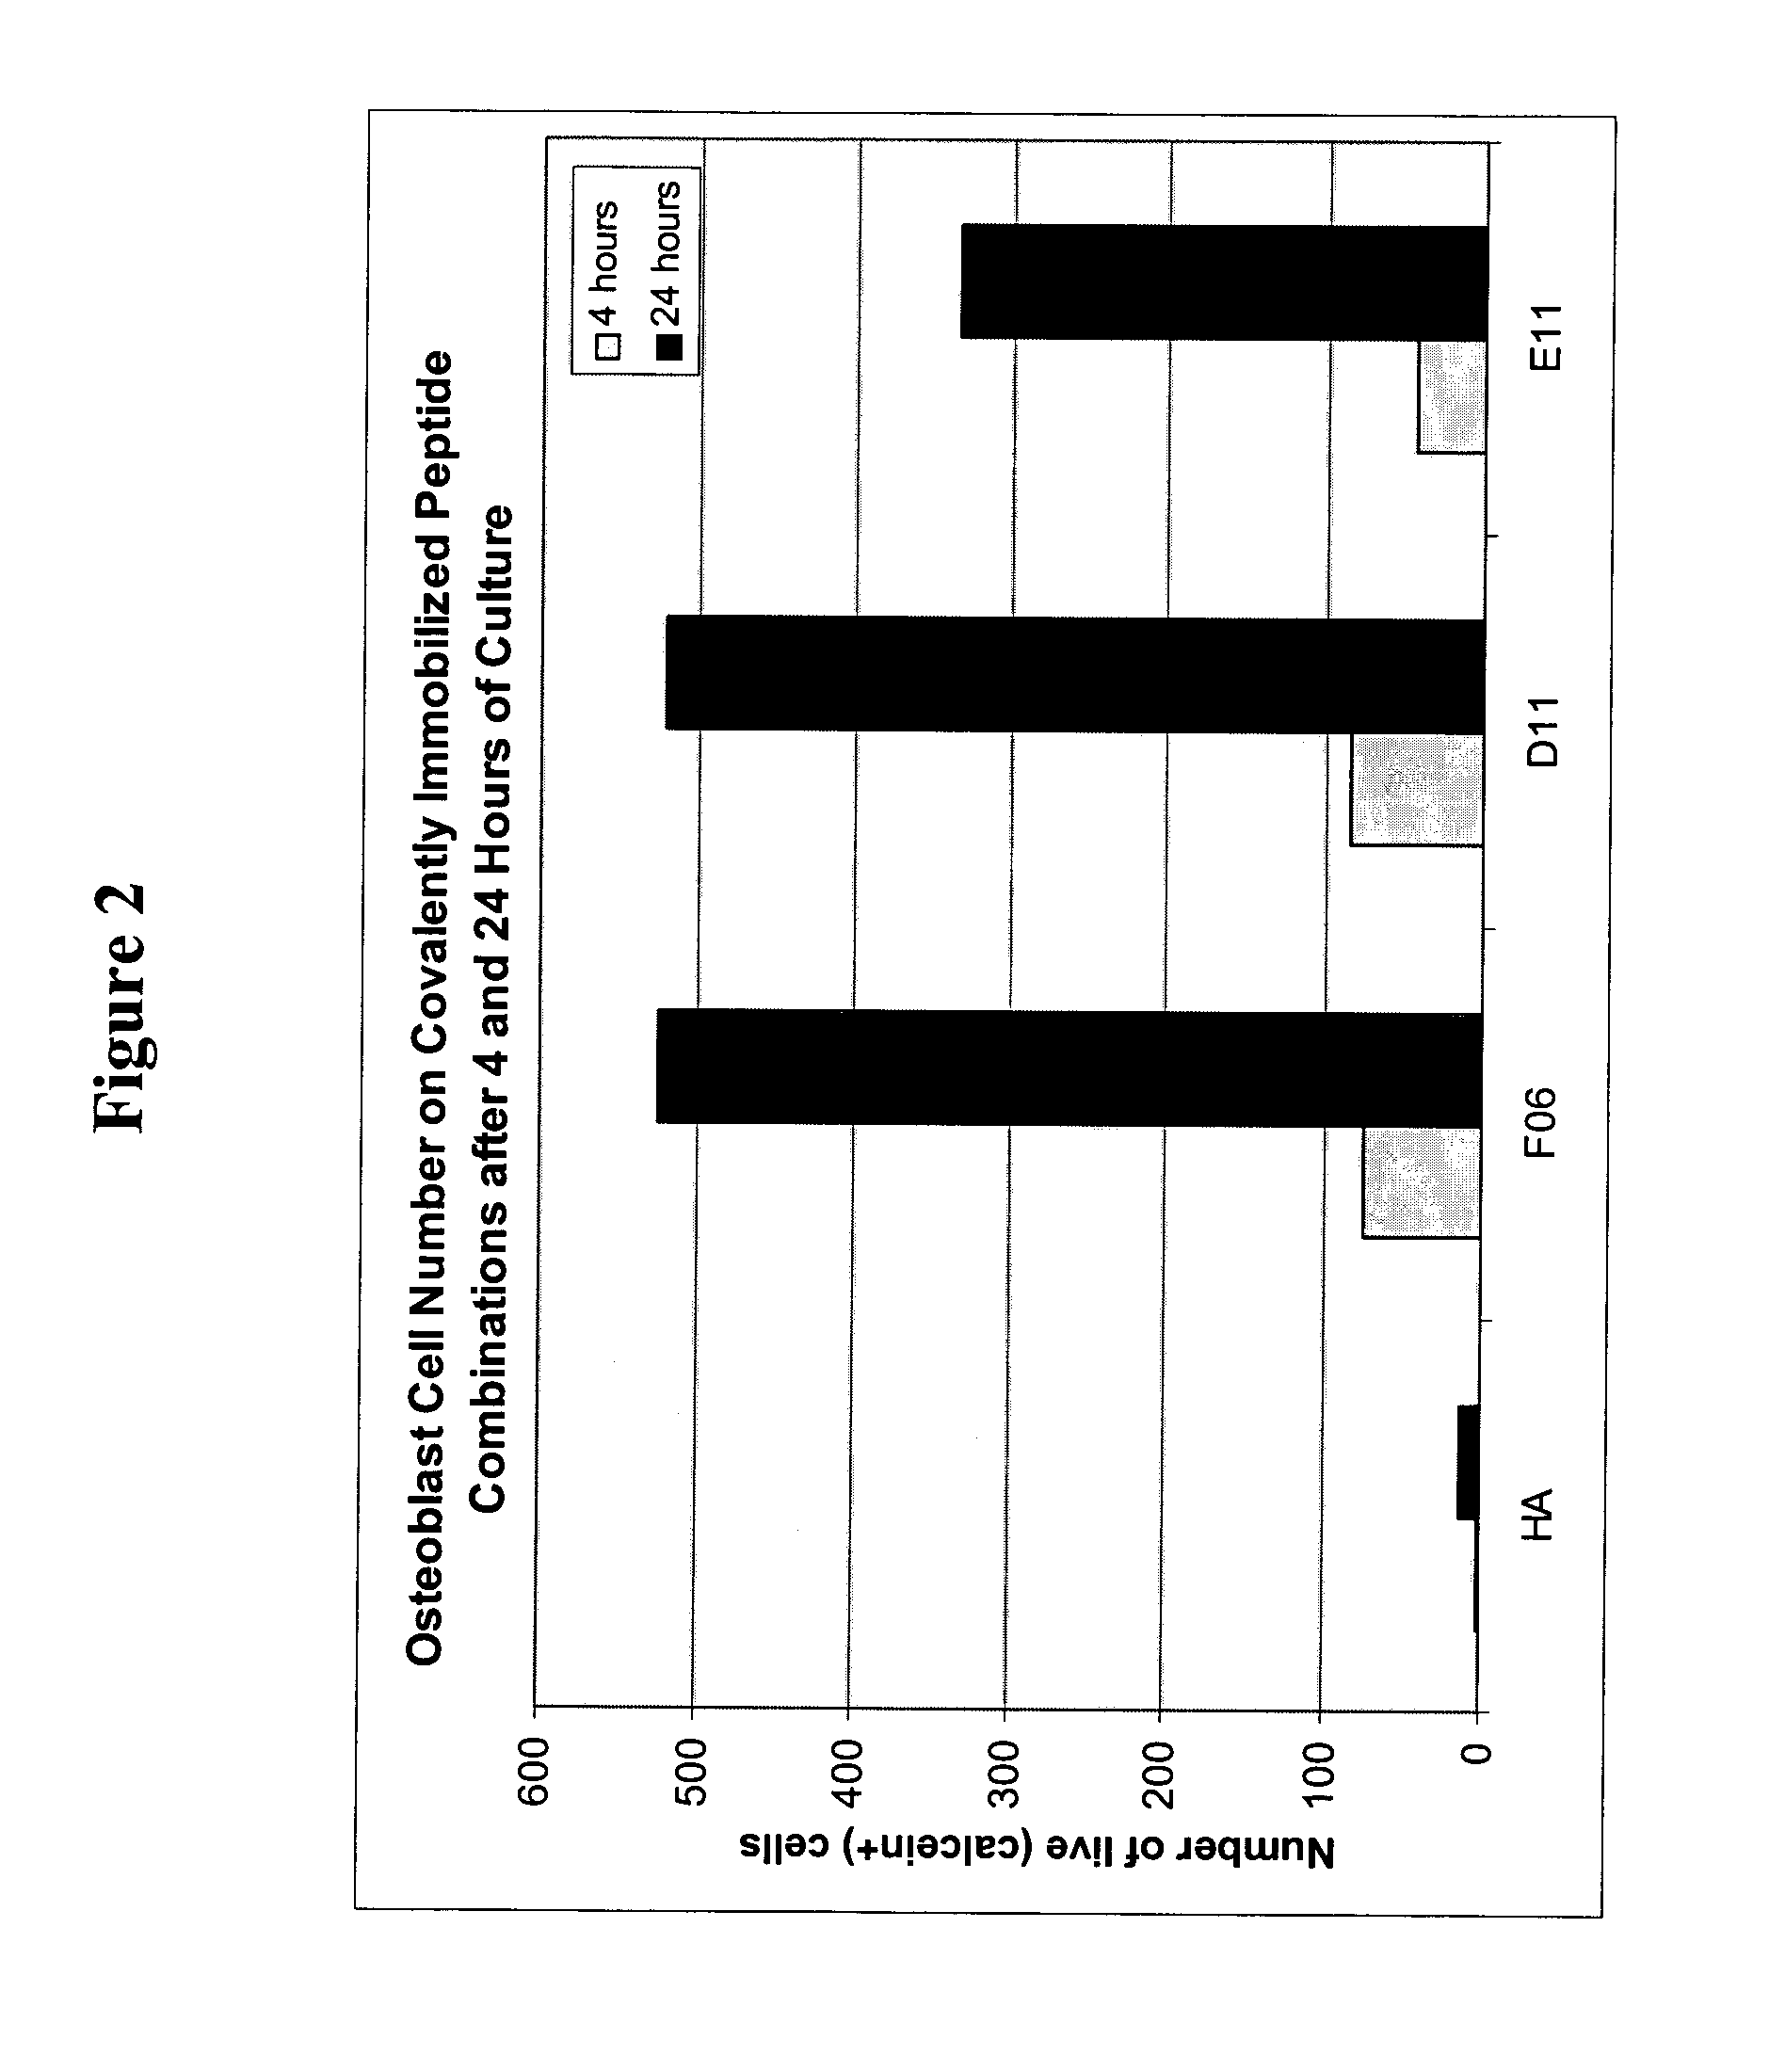 Peptides for enhanced cell attachment and cell growth